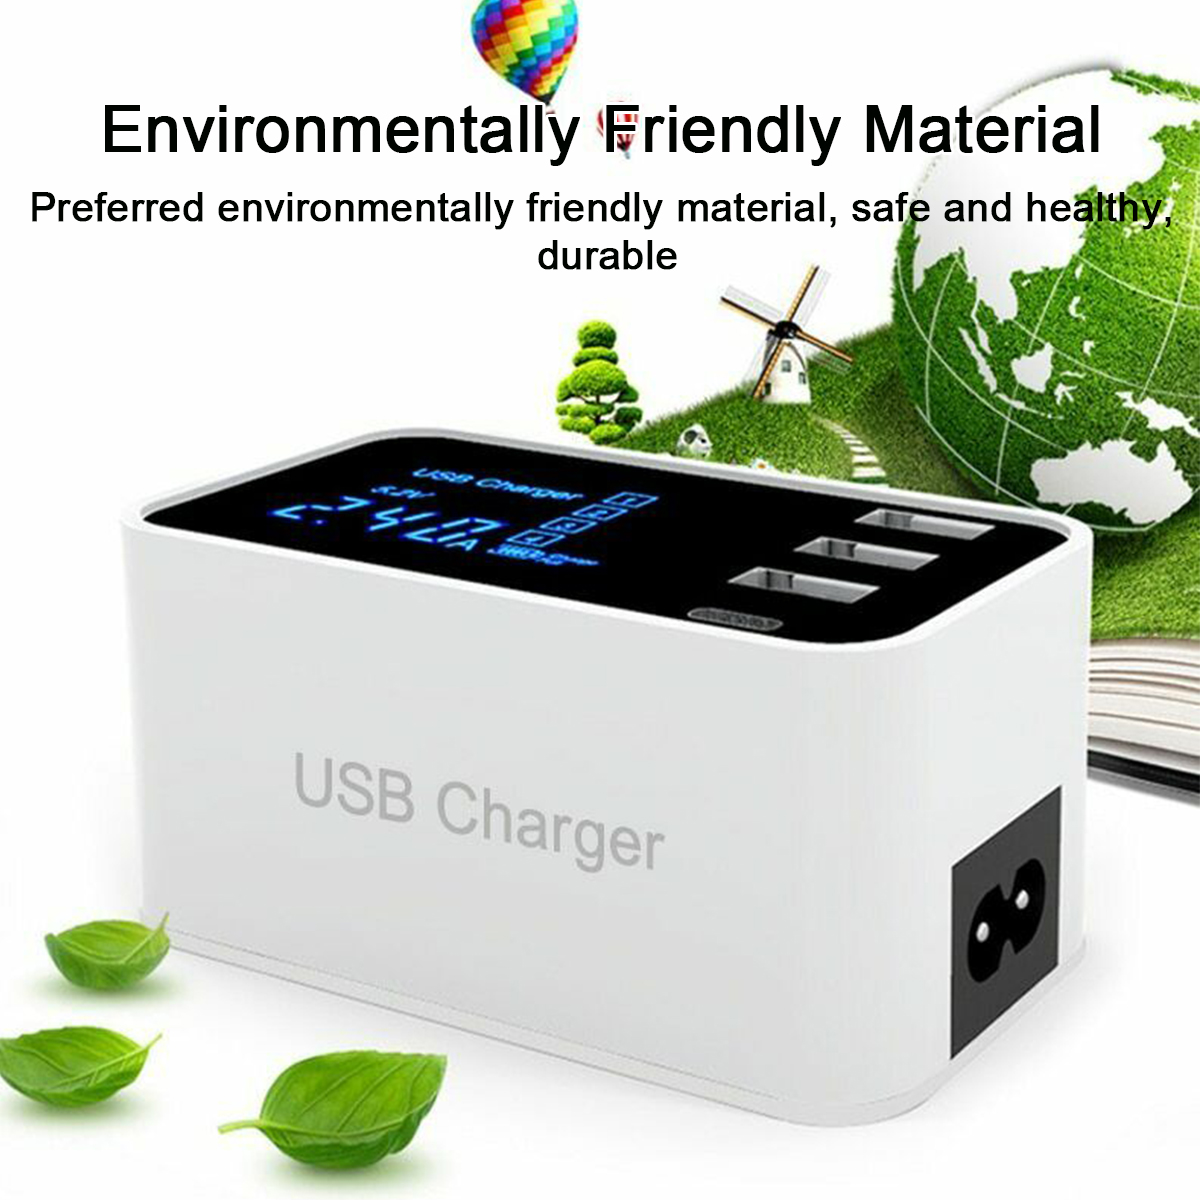 3USB-Port-USB-Charger-Type-C-LCD-Display-Charger-100-240V-Charging-Station-1590747-8